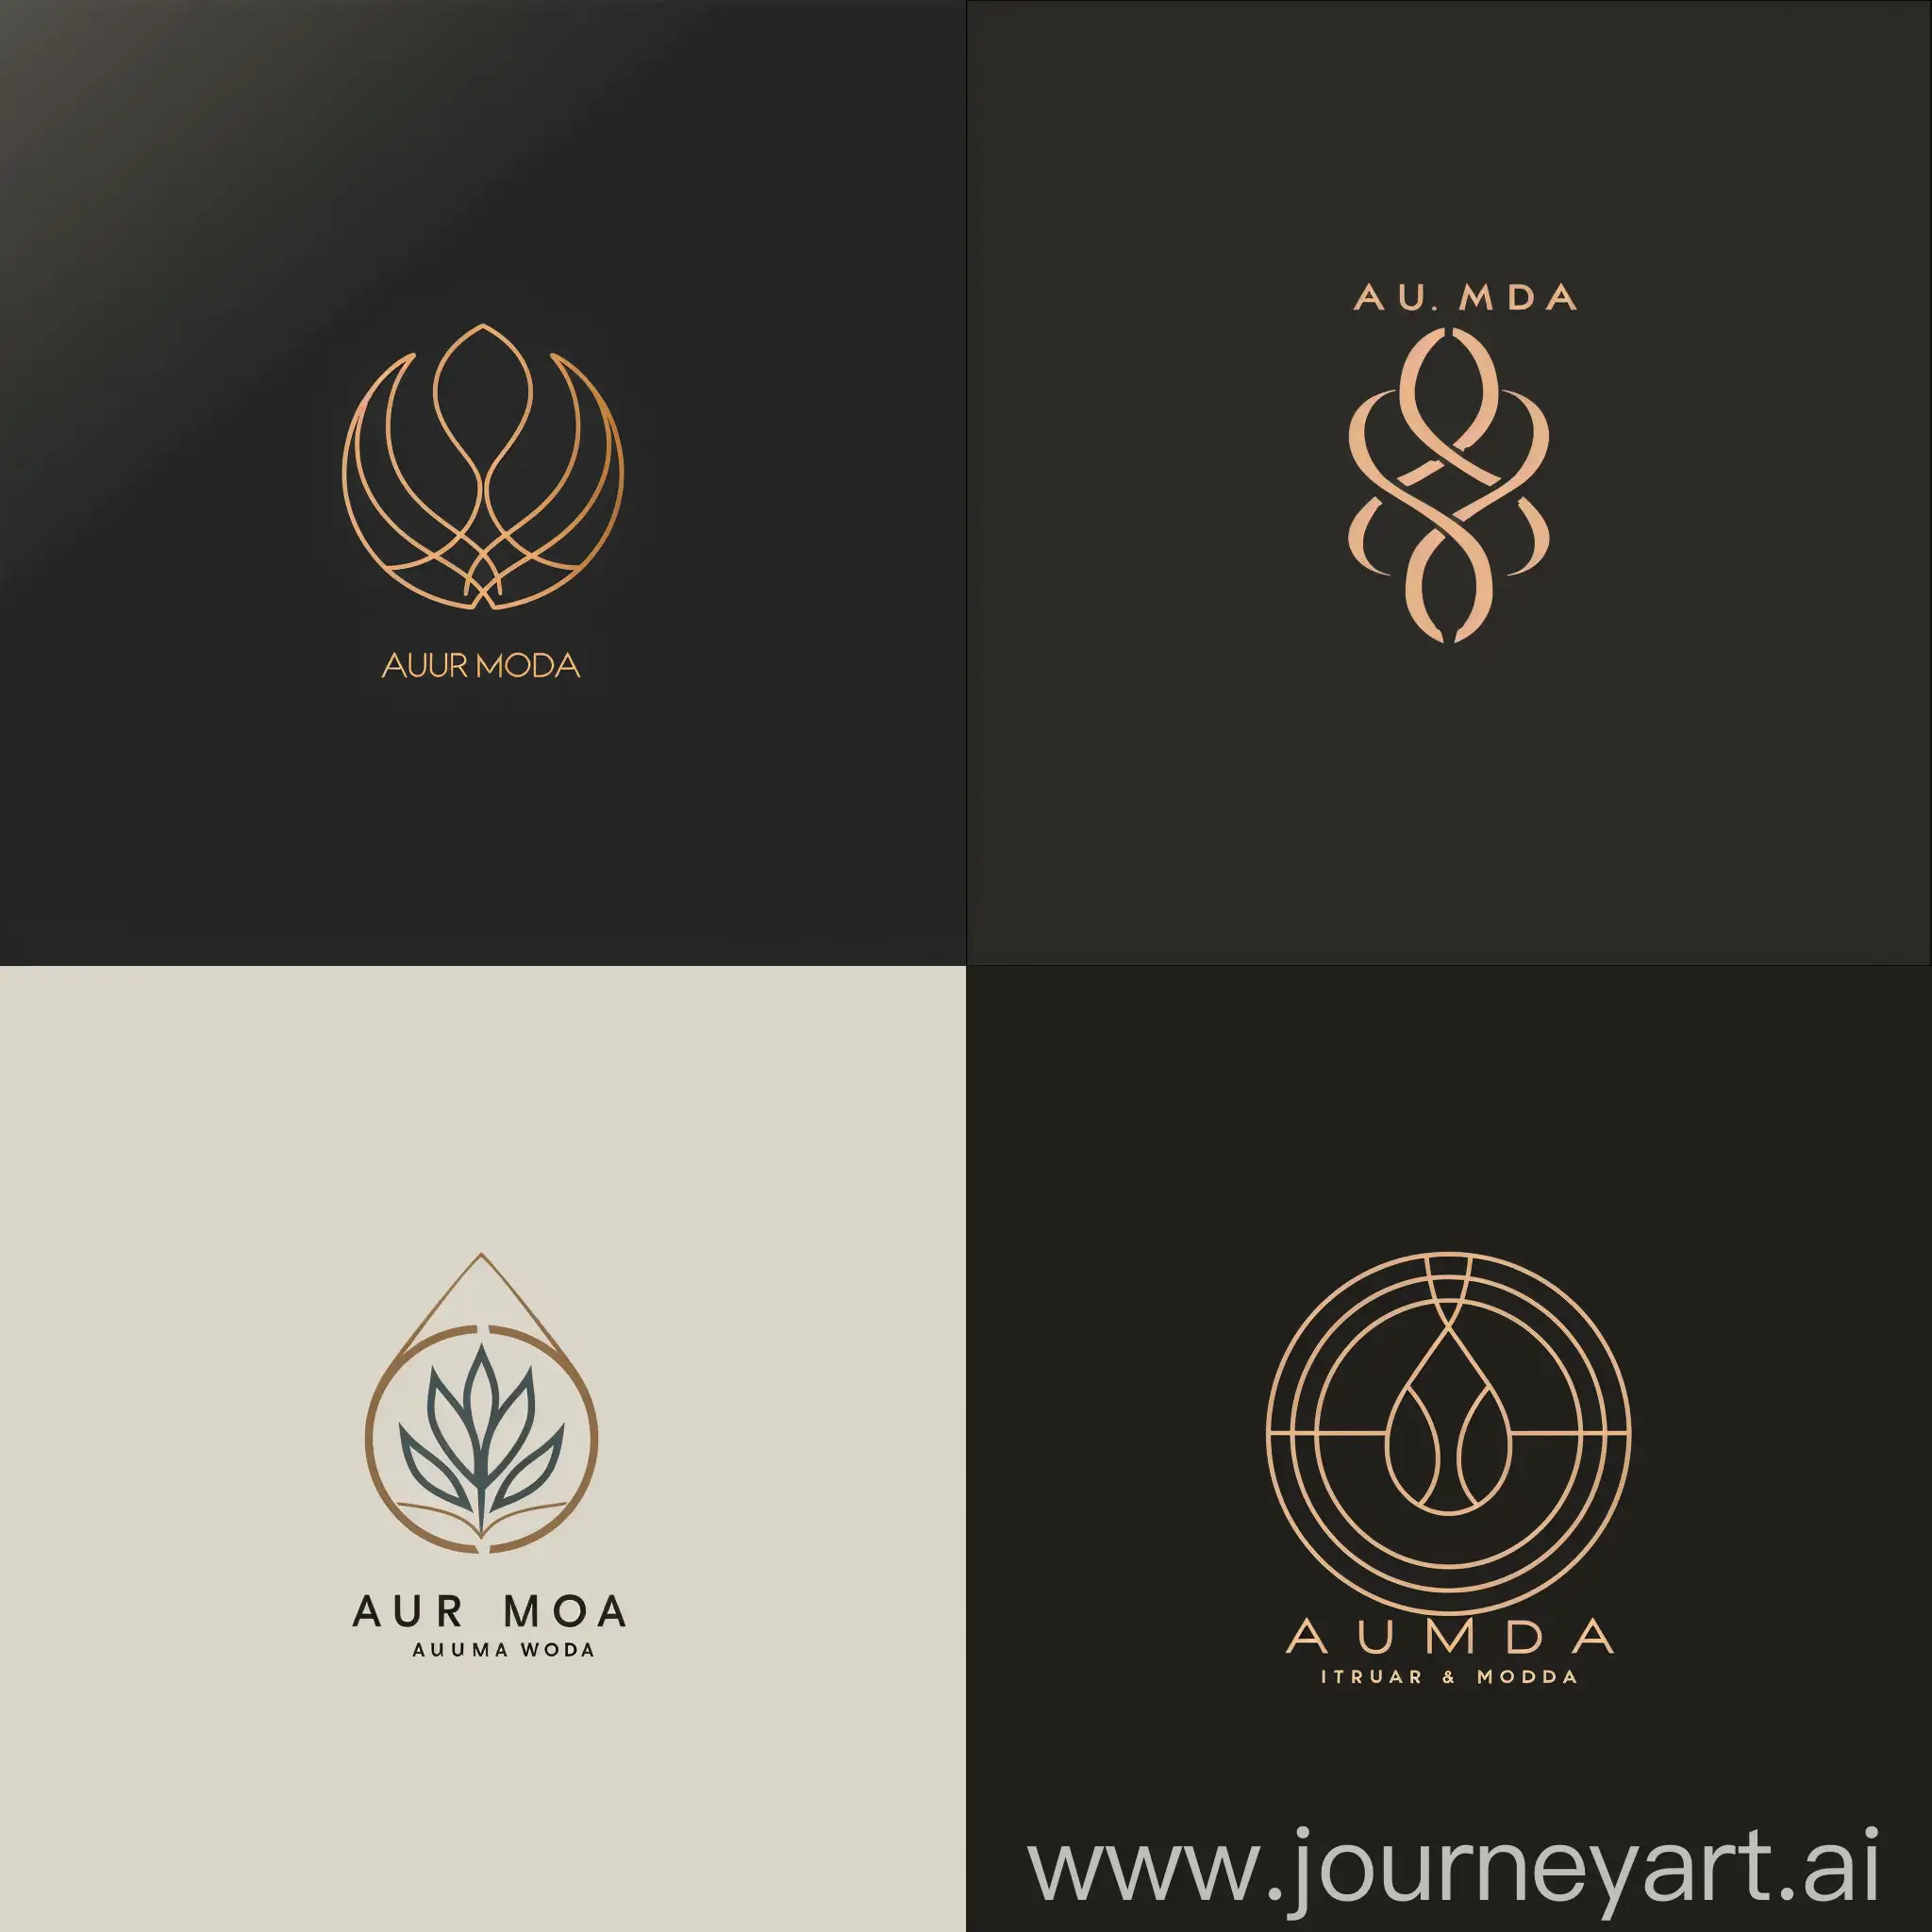 **Aura Moda** I designed a simple logo that includes a symbol that symbolizes elegance and sophistication, while using calm colors that express elegance.